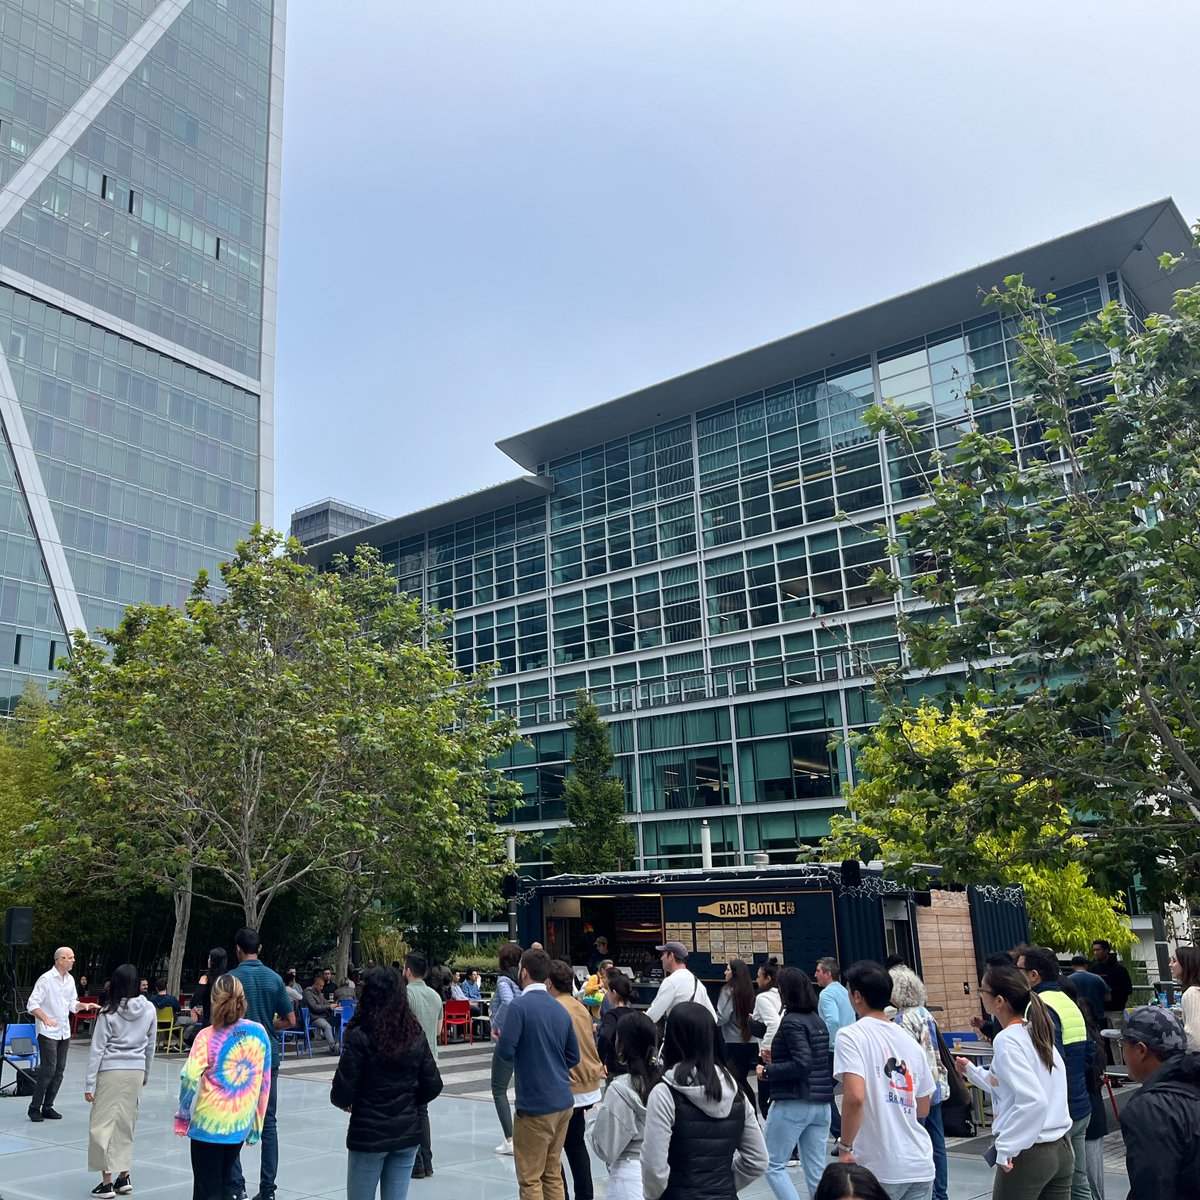 Programming is back in full swing! Get May started with dancing sessions; meet us at TJPA's Salesforce Park Main Plaza for Swing in the Sky with The Hot Baked Goods at 6 p.m. today, 5/1, and Mucho Mambo Salsa Night tomorrow, 5/2, at 5:30 p.m. 🪩